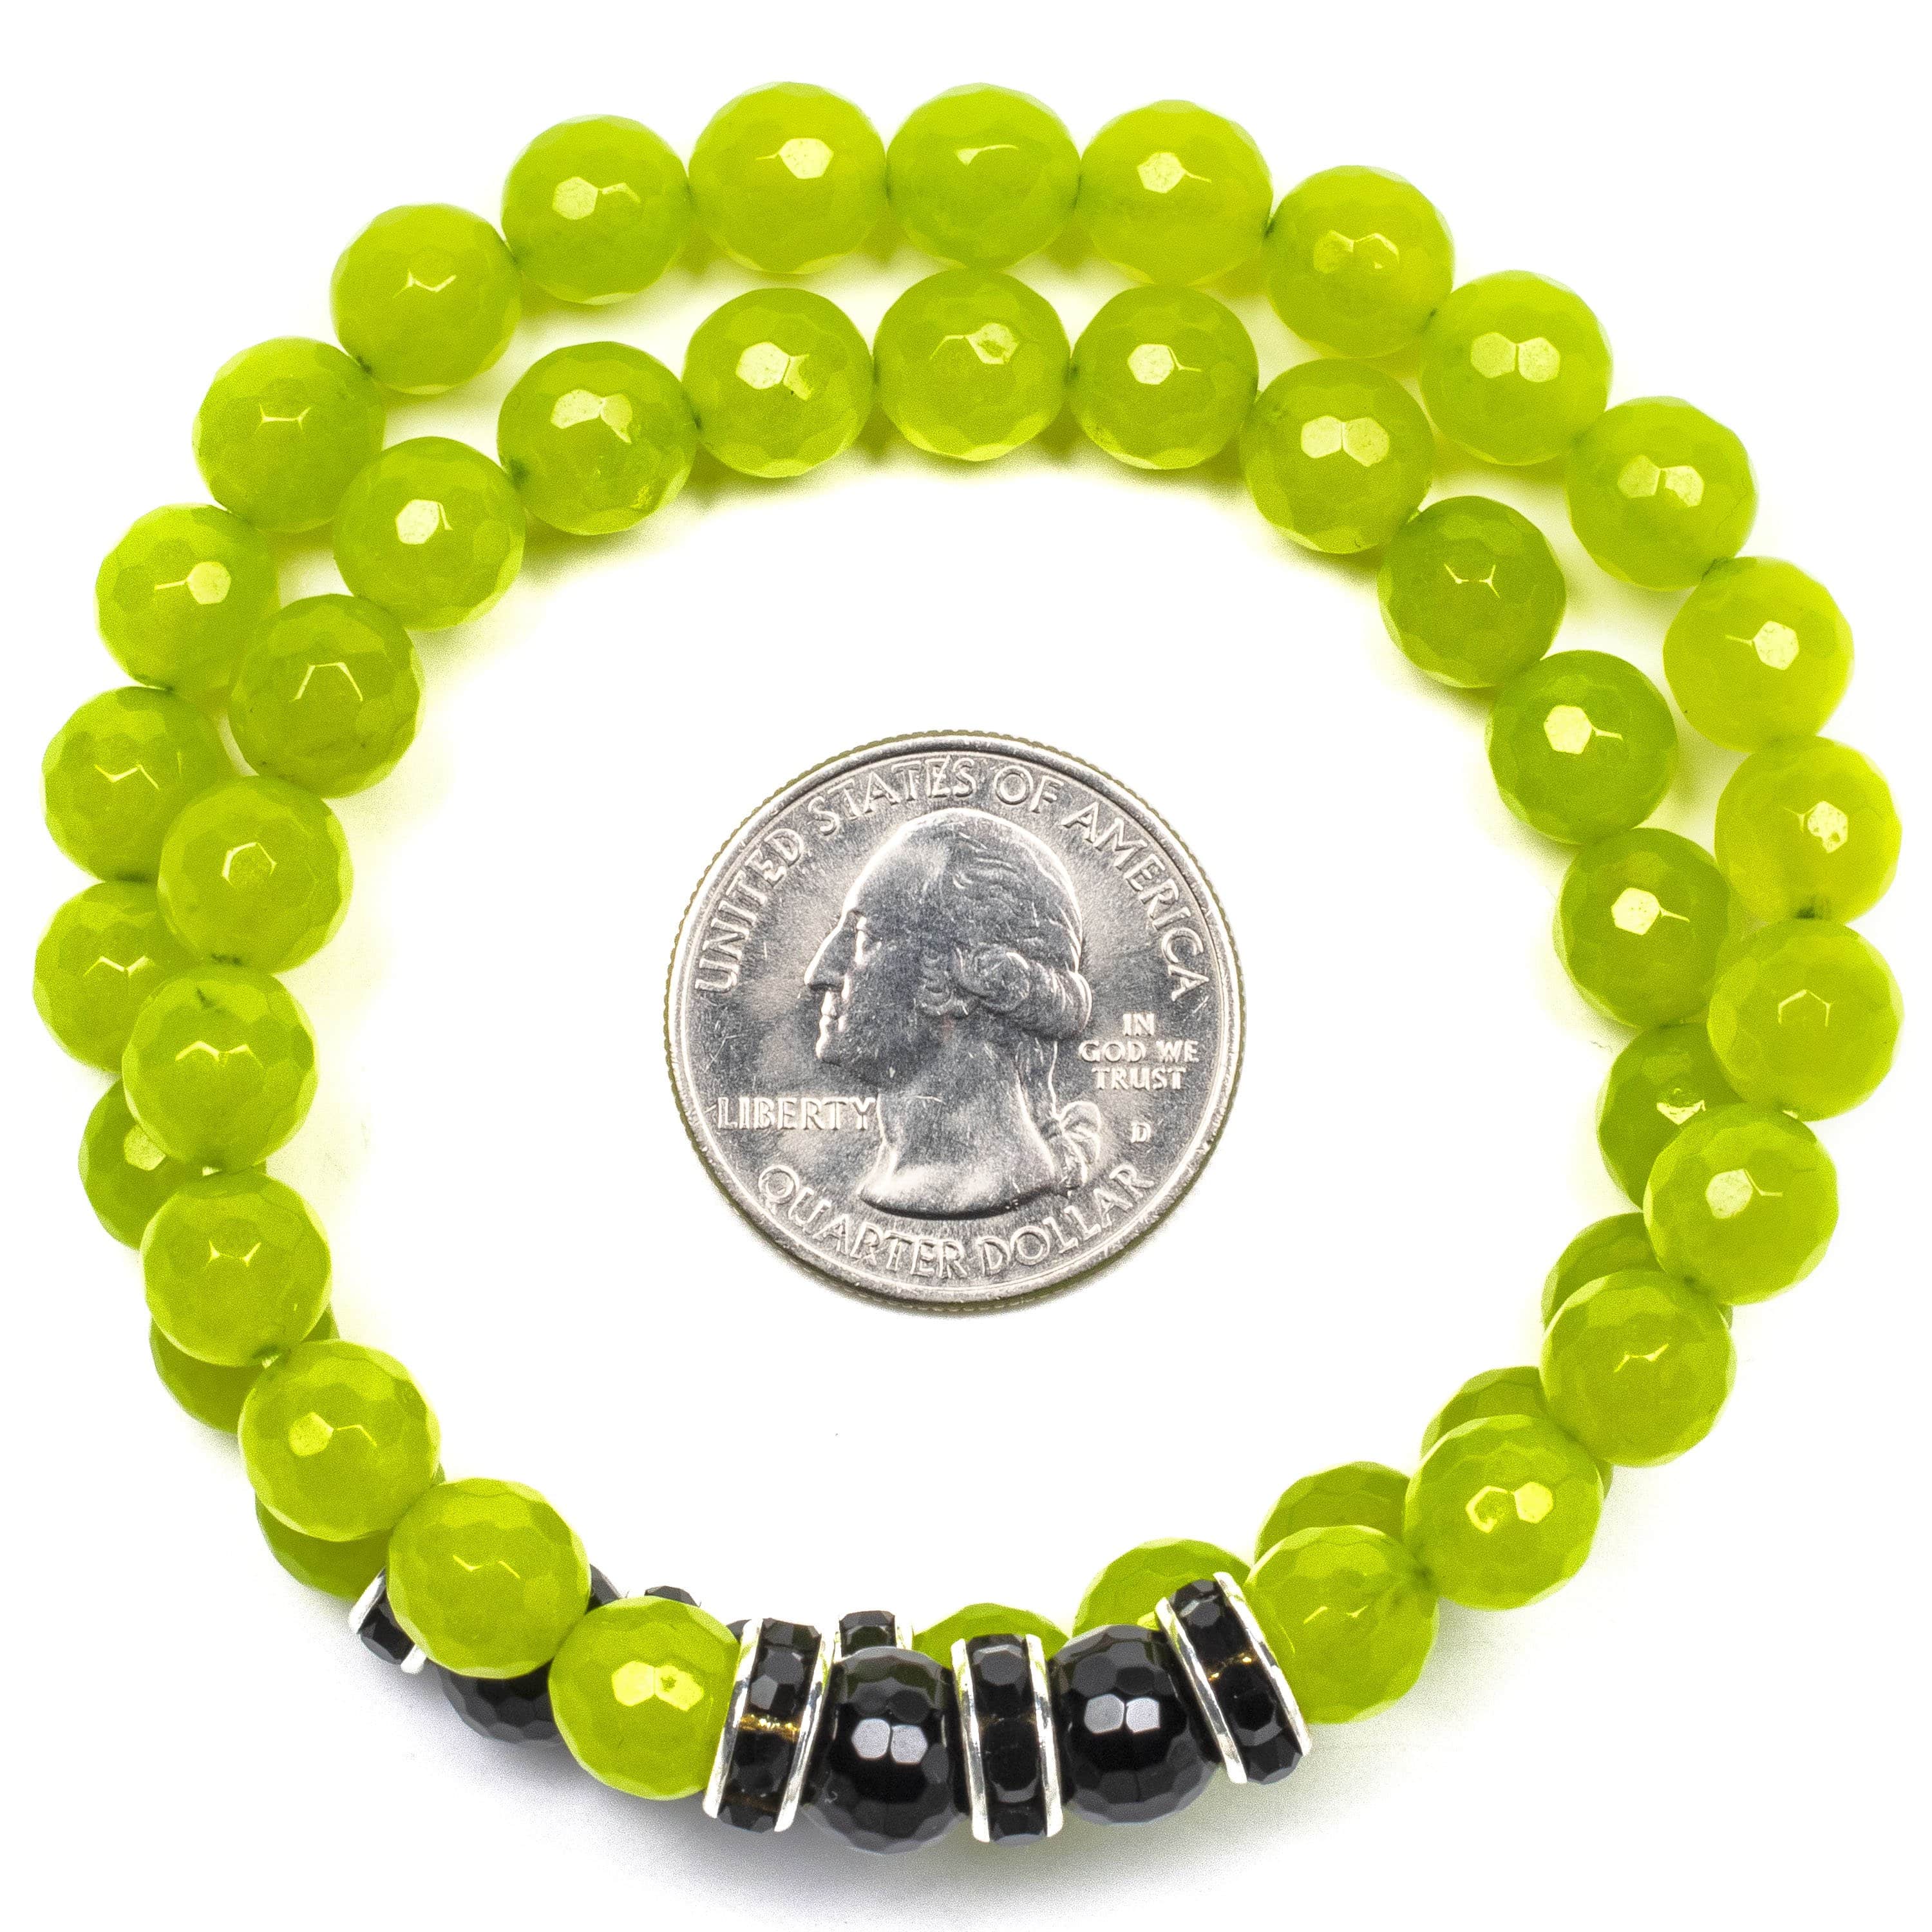 Kalifano Gemstone Bracelets Faceted Bright Green Agate 8mm Beads with Black Agate and Black and Silver Accent Beads Double Wrap Elastic Gemstone Bracelet WHITE-BGI2-019